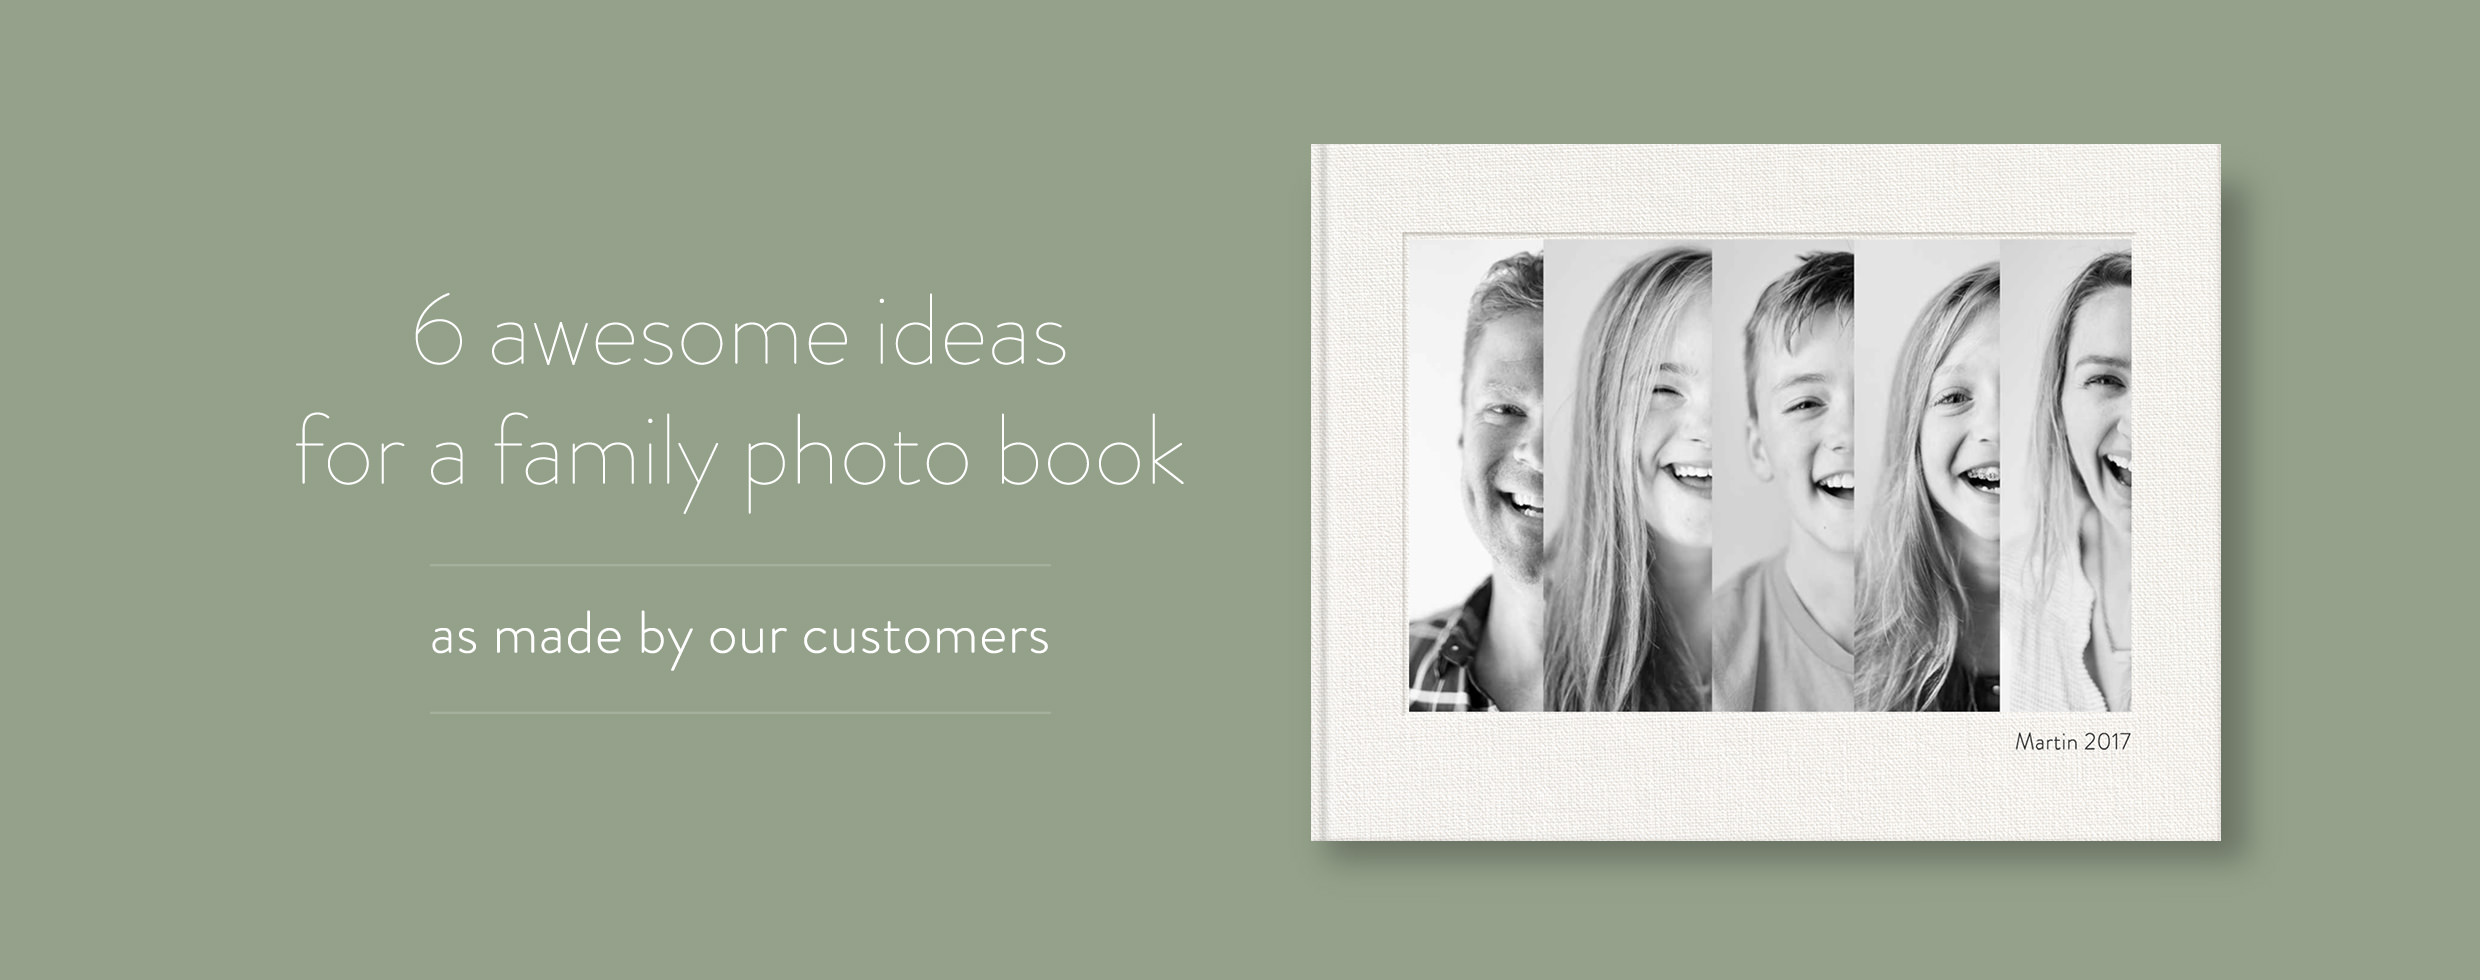 6 awesome ideas for a family photo book as made by our customers with a family photo book.